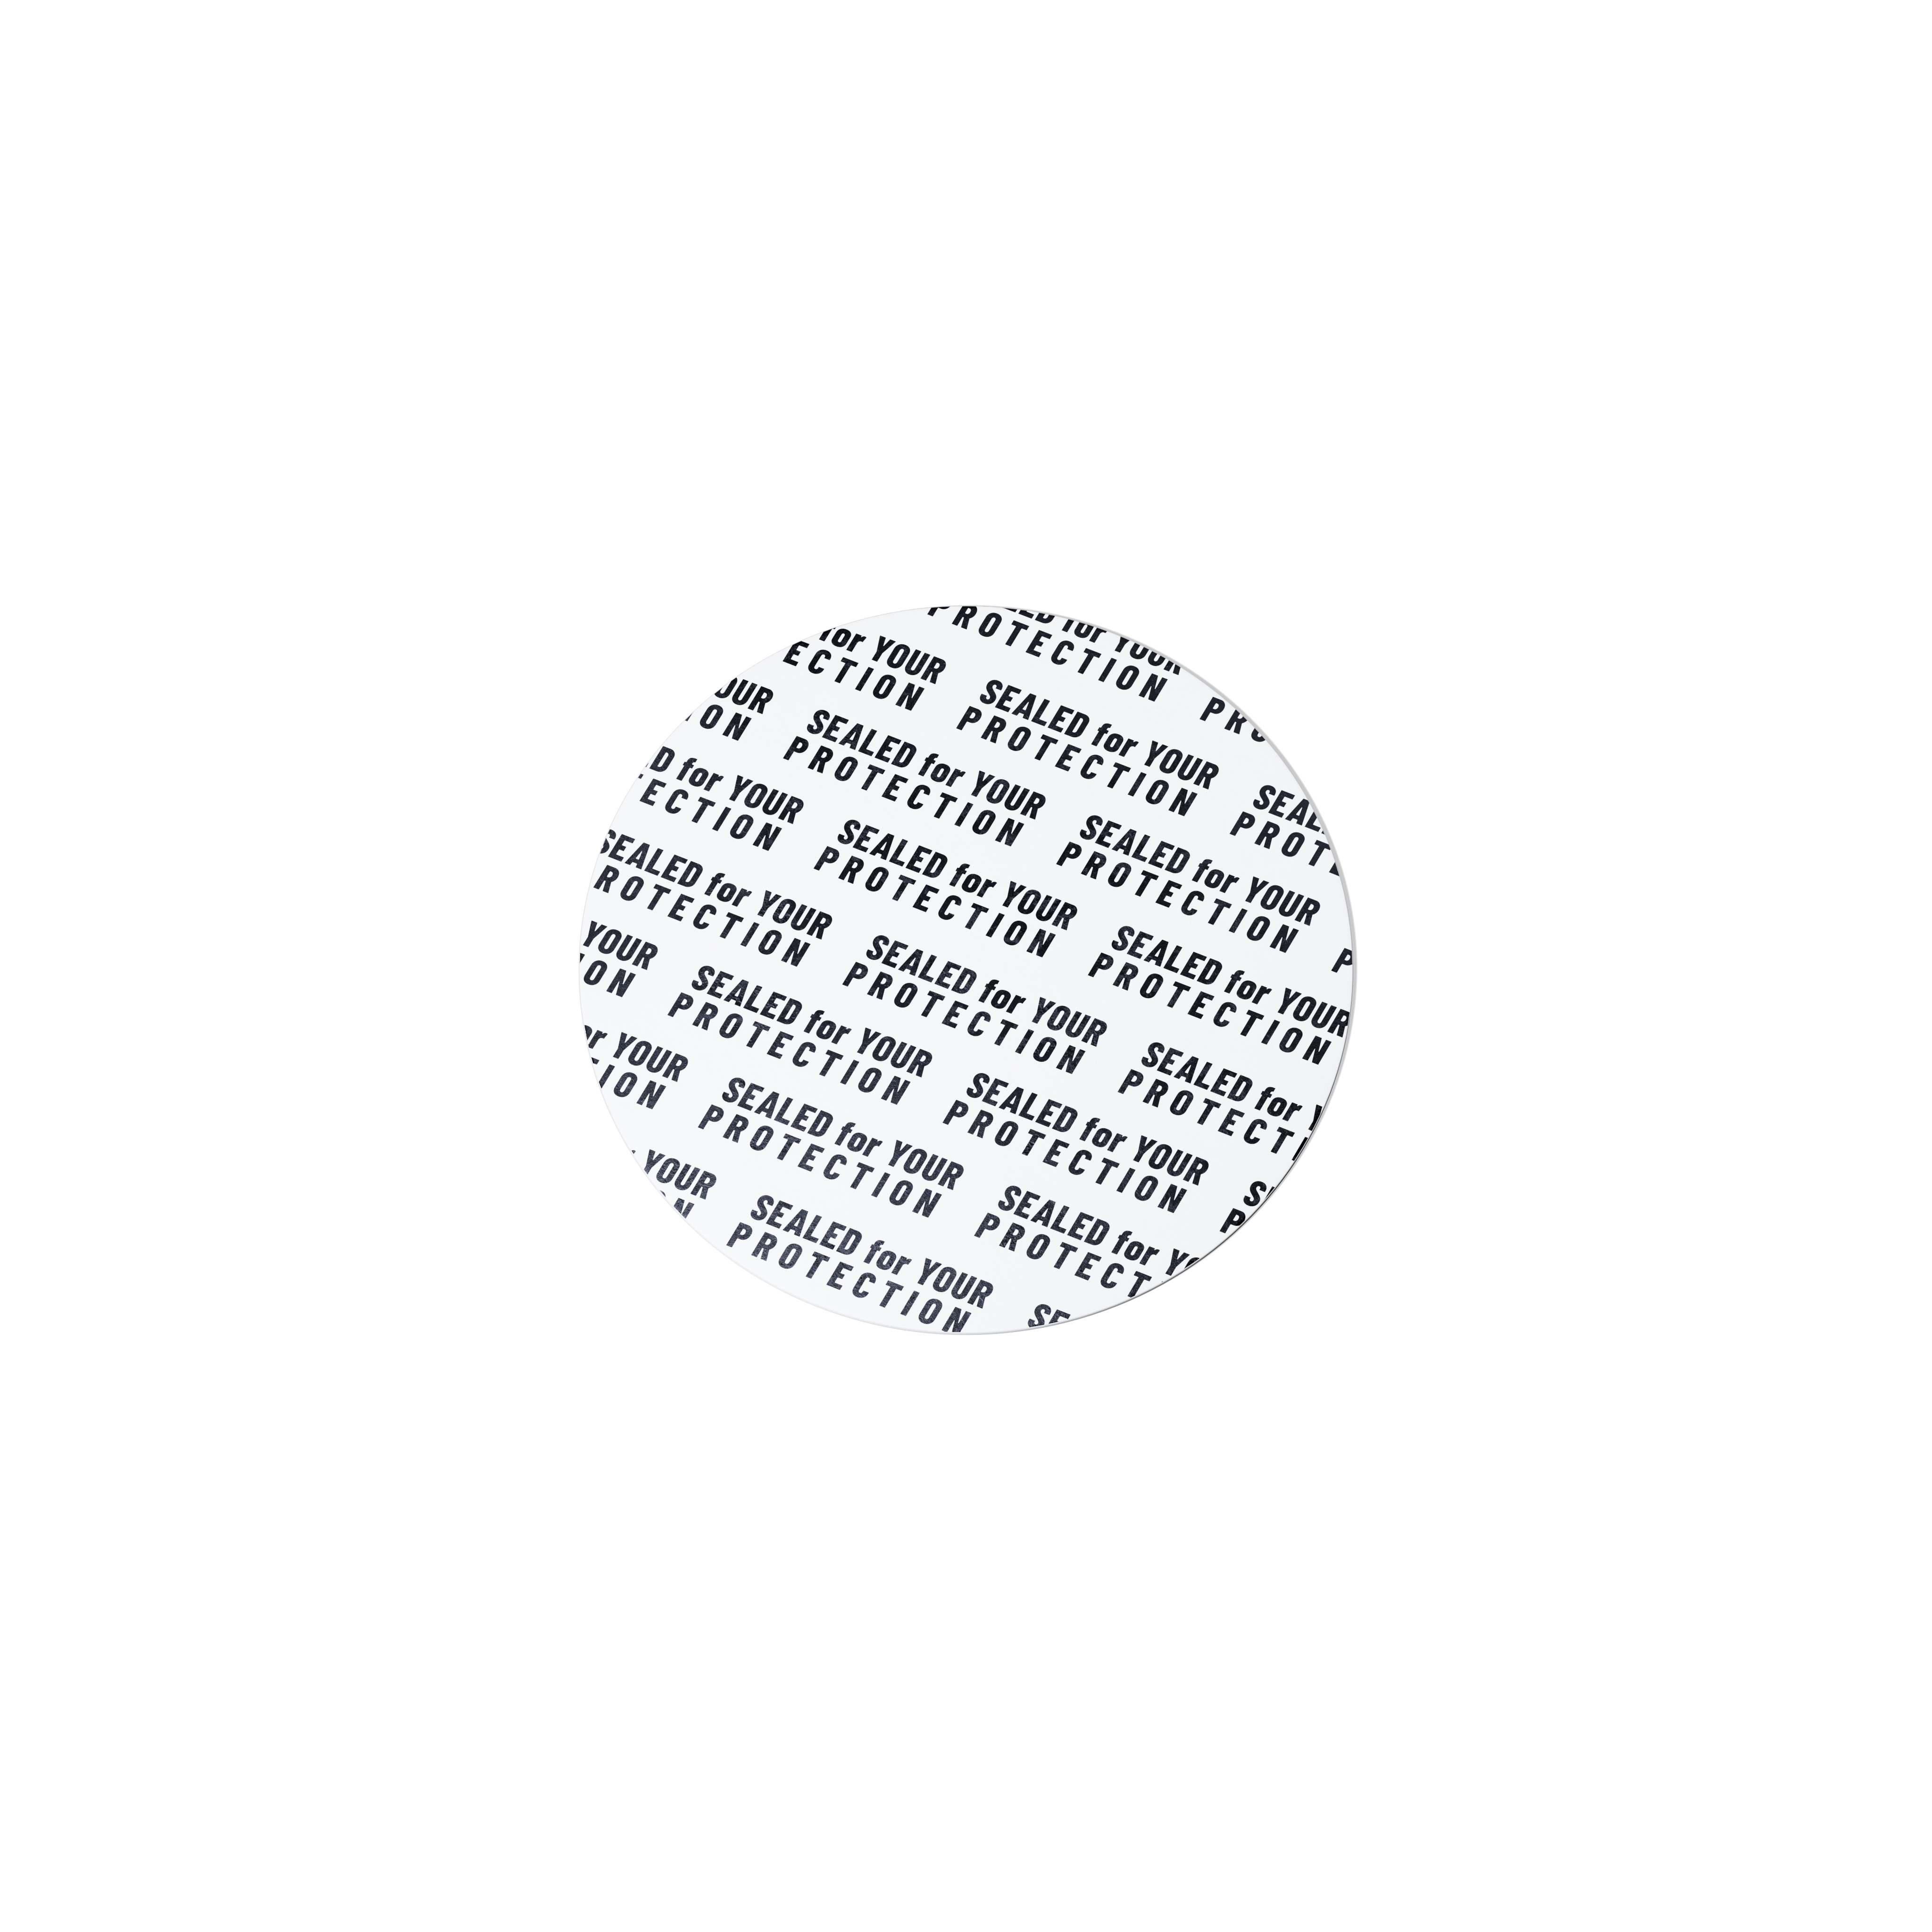 Pressure sensitive seal, 47mm, white, black text (Ceres 30), only applicable for dry goods